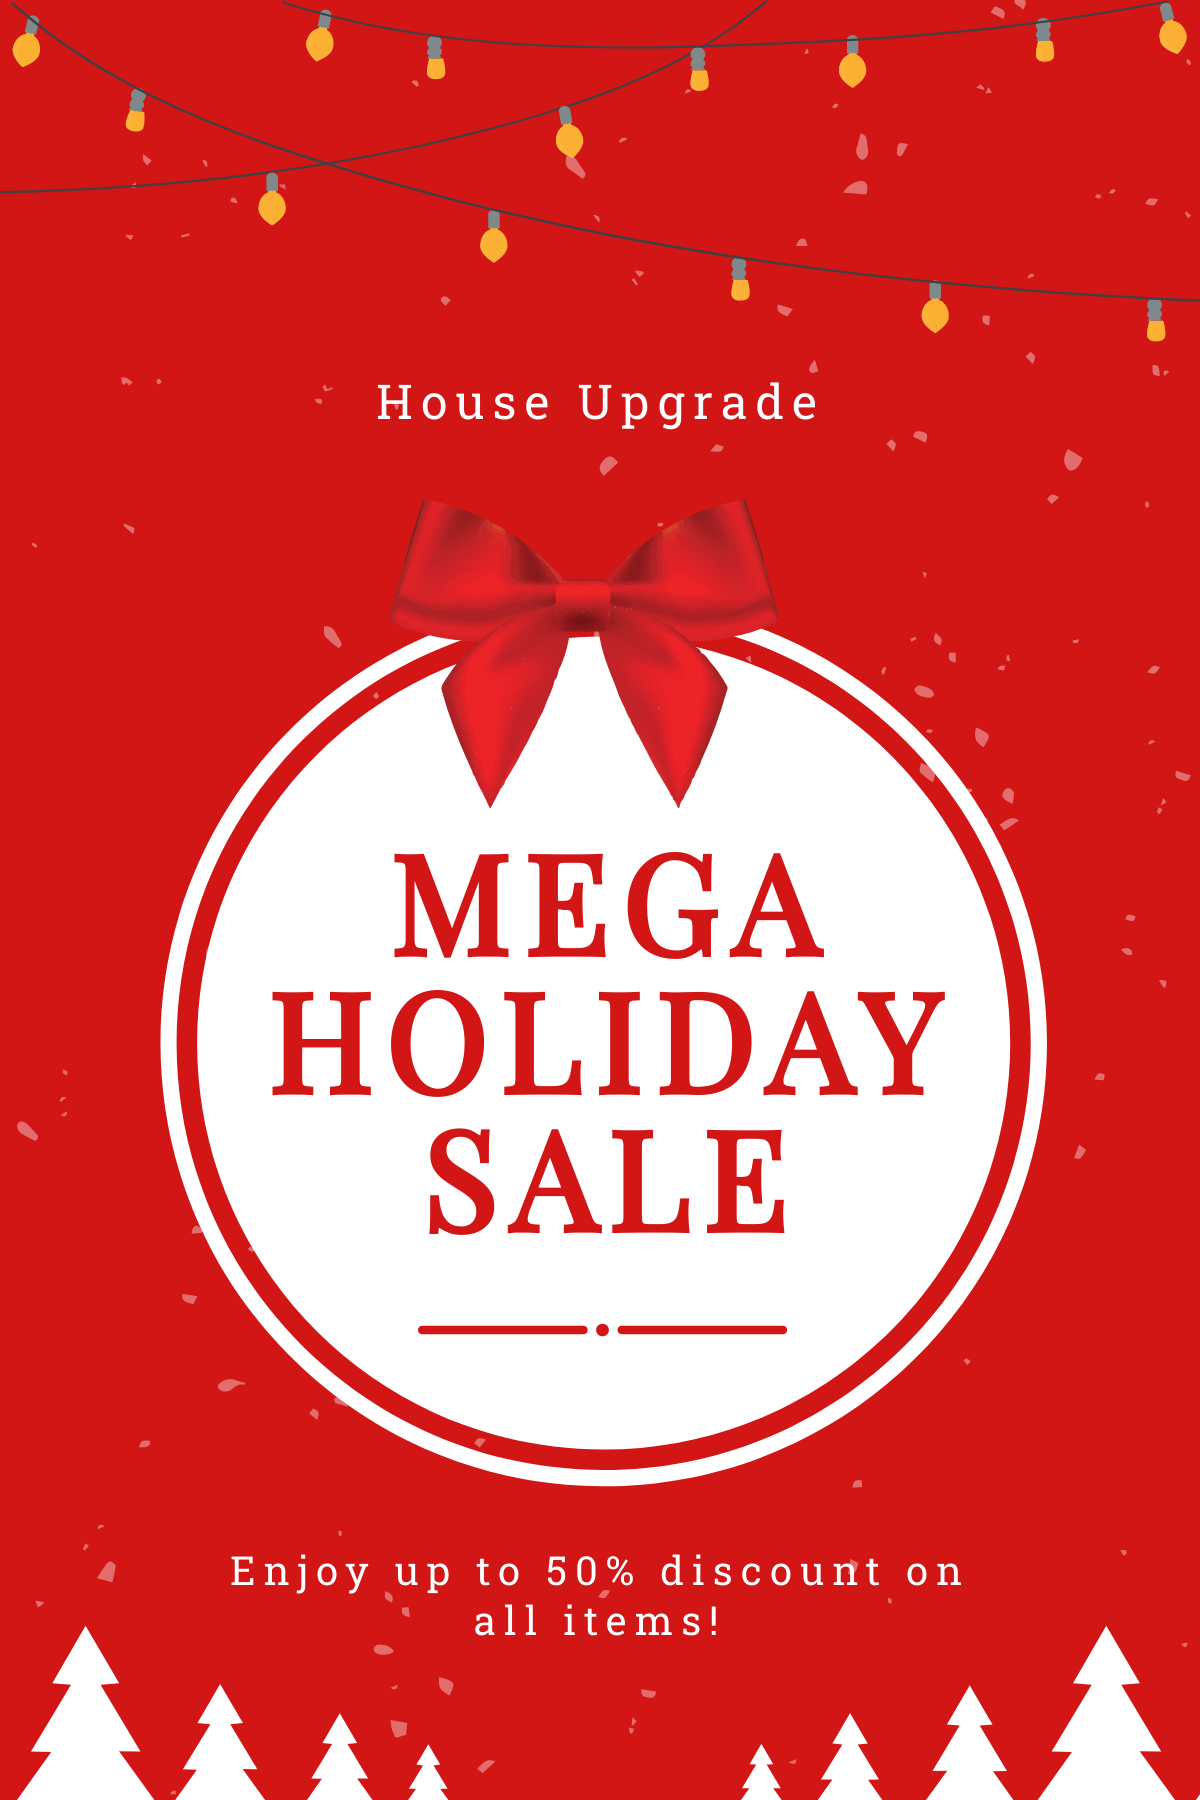 Simple Holiday Sale Pinterest Pin Template